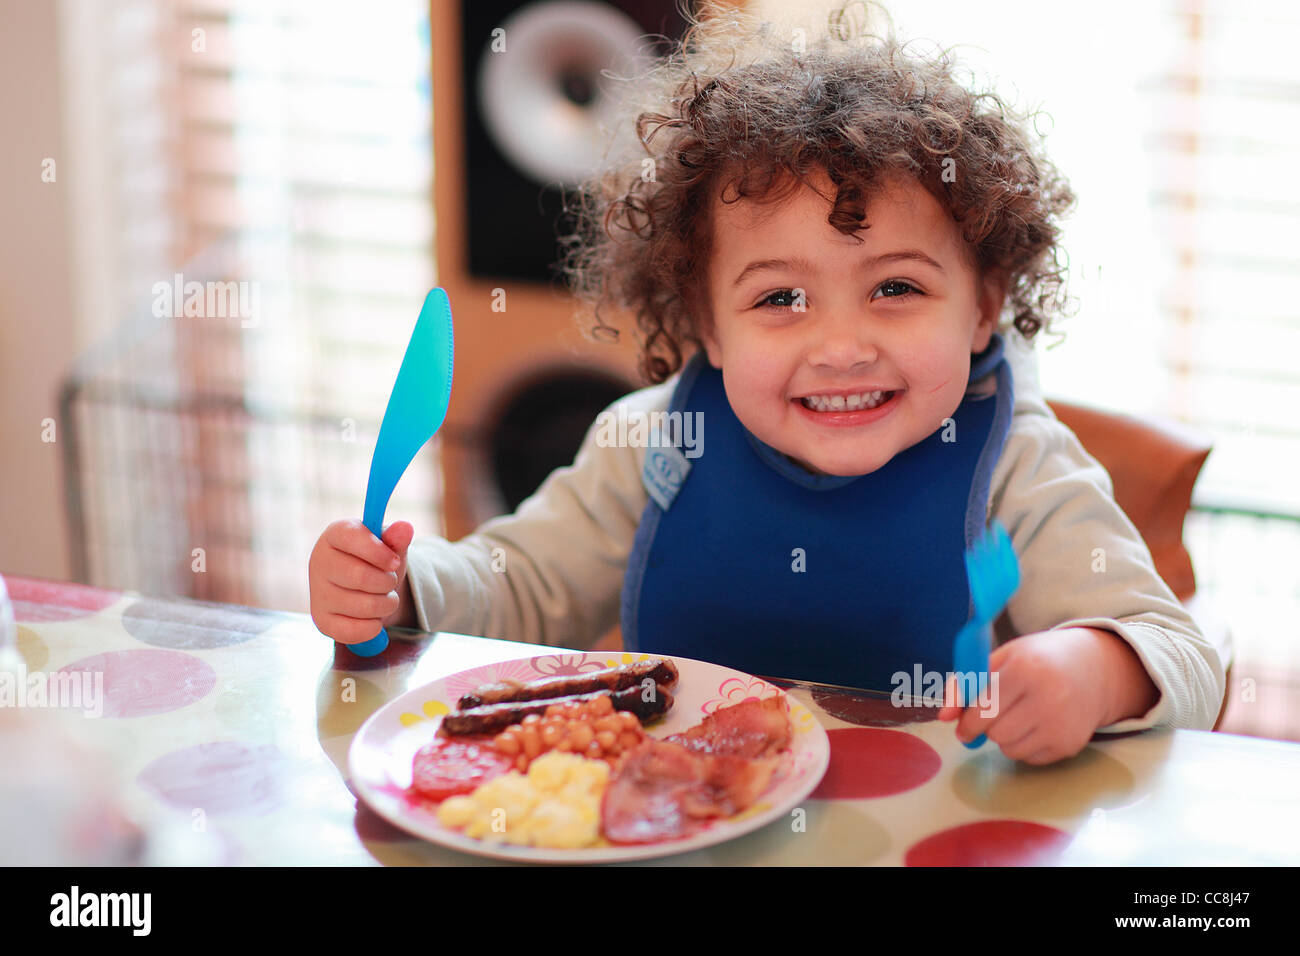 Toddler Eating Fry Up Breakfast Stock Photo